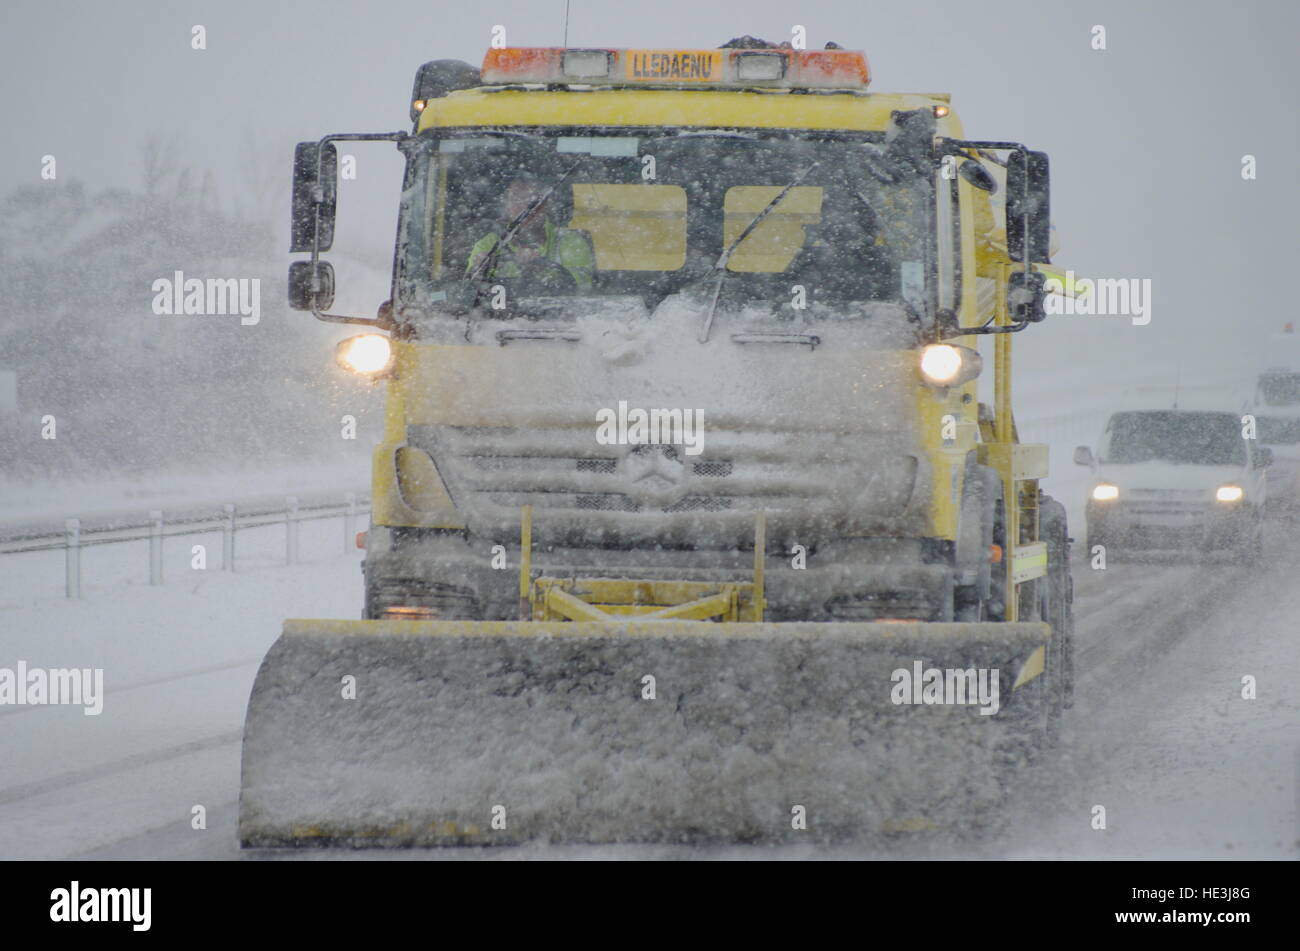 Hazardous driving conditions on A55 expressway Stock Photo